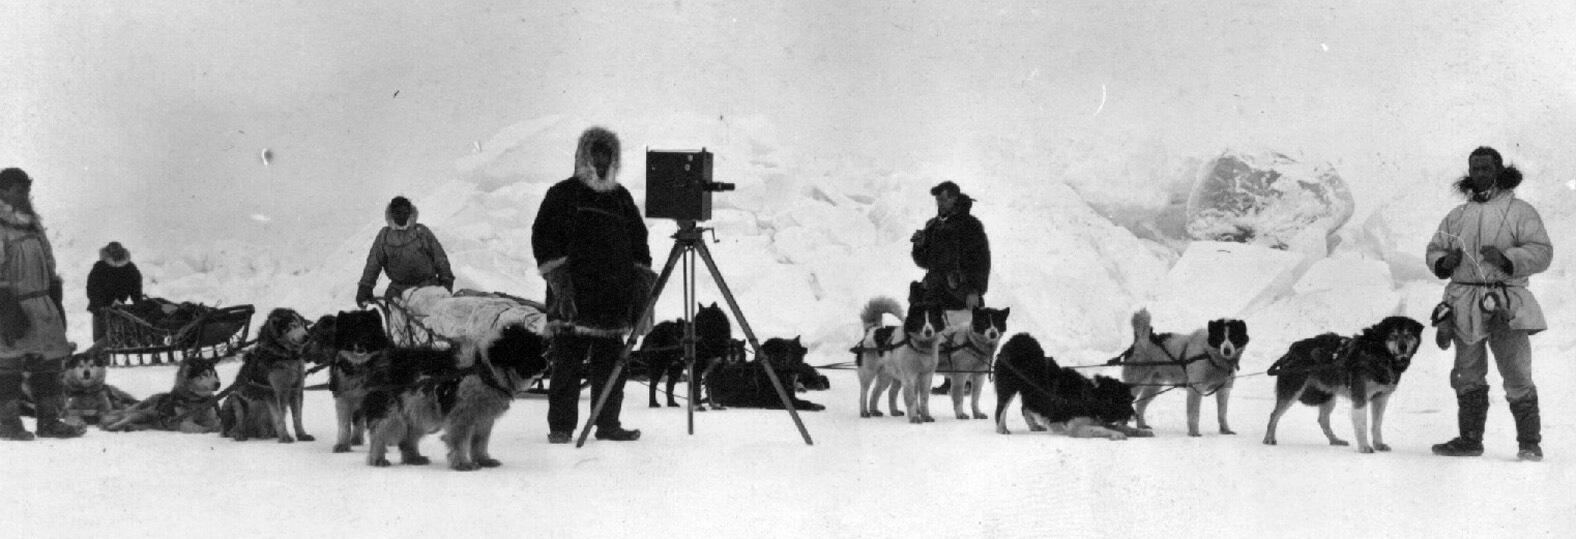 1913: Surviving on the Arctic ice with Stefansson and expedition members